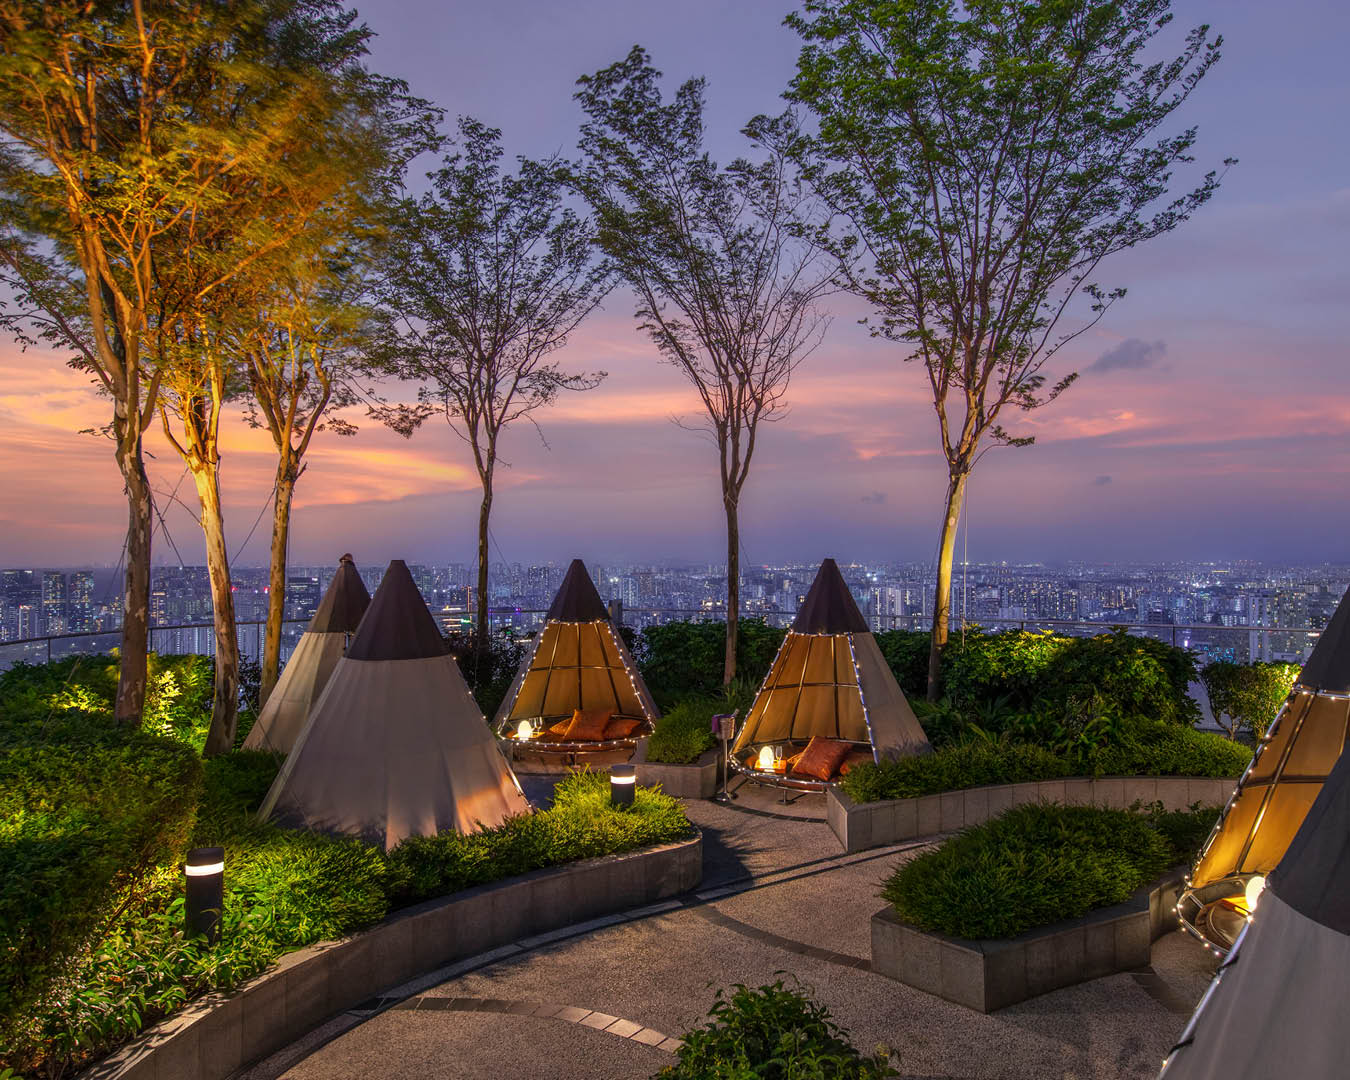 Tipi huts at Mr Stork rooftop bar in Singapore.